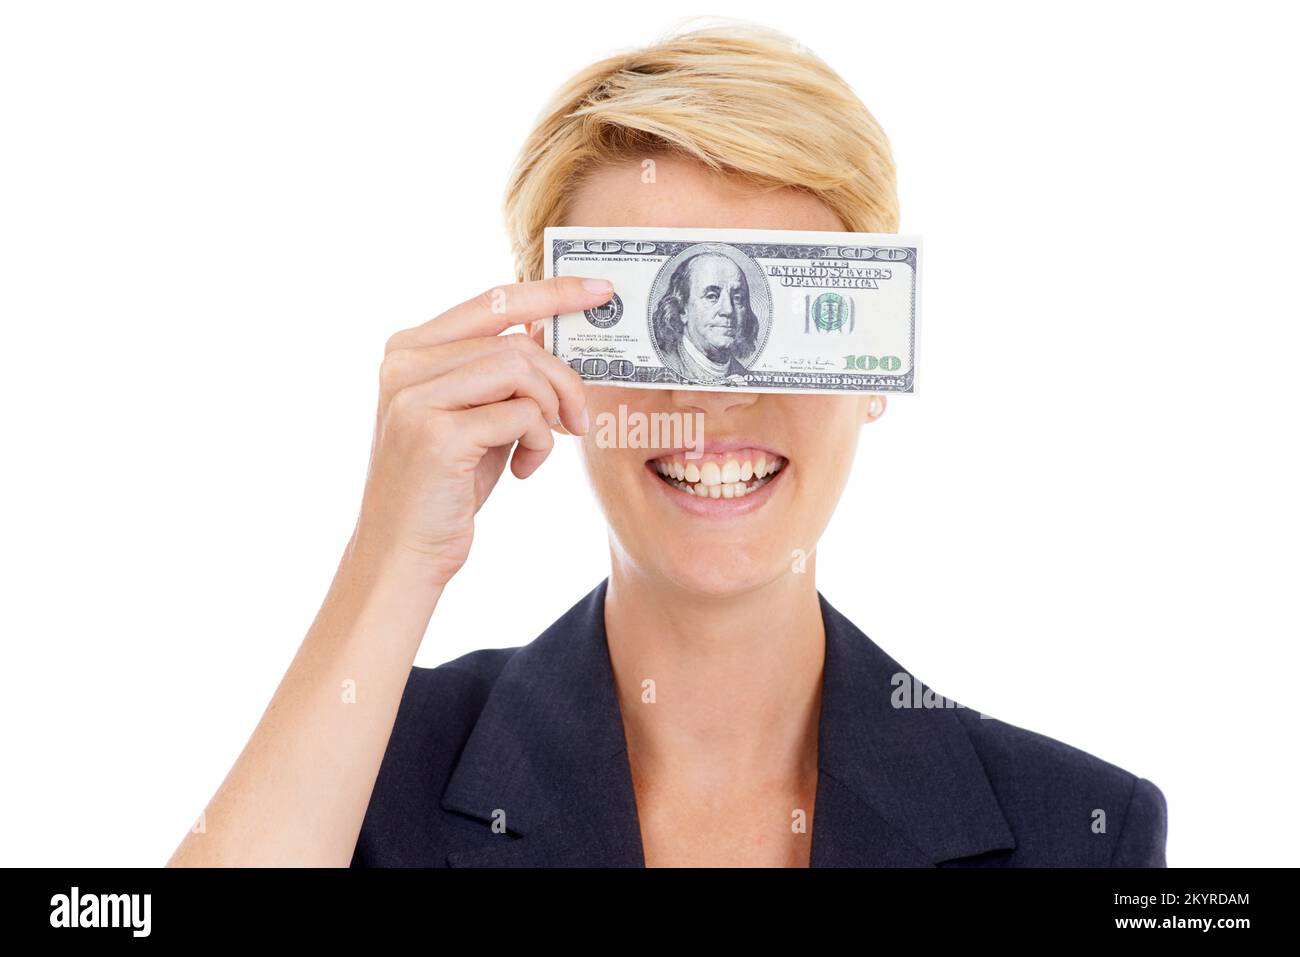 Money makes me smile. A young businesswoman holding a 100 dollar bill in front of her eyes. Stock Photo